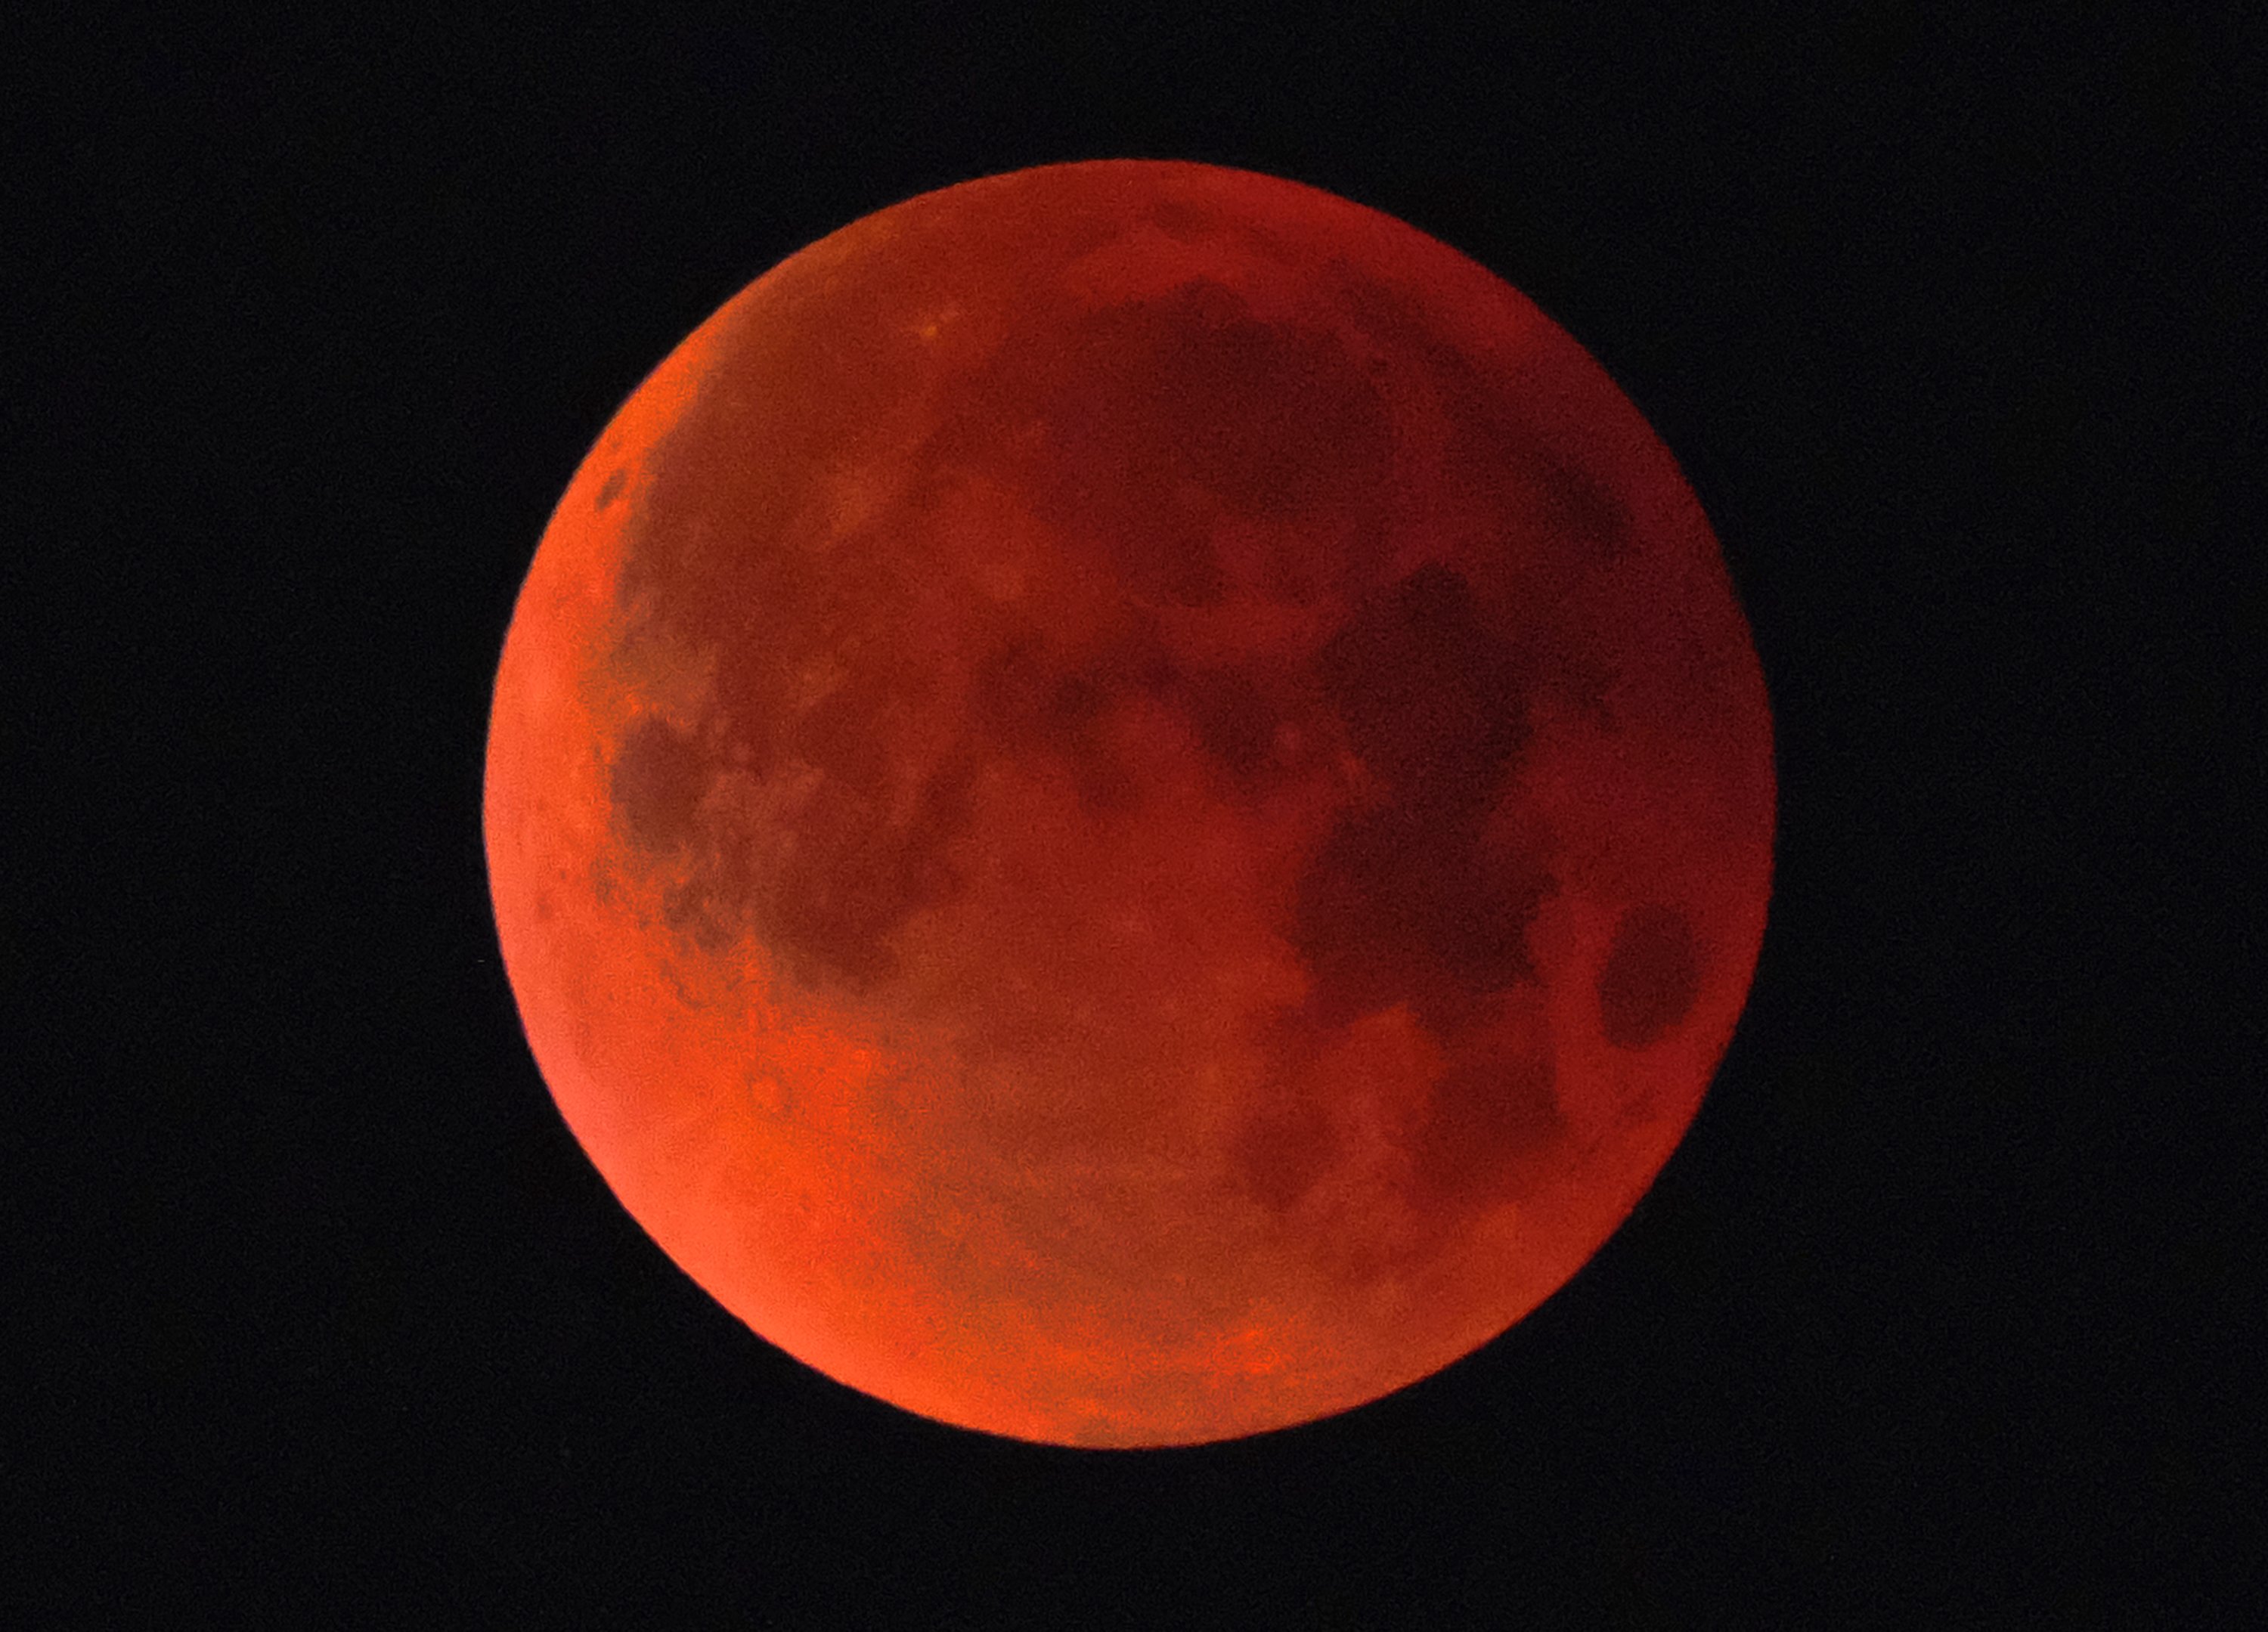 Lunar showstopper Super blue blood moon awes and wows AP News